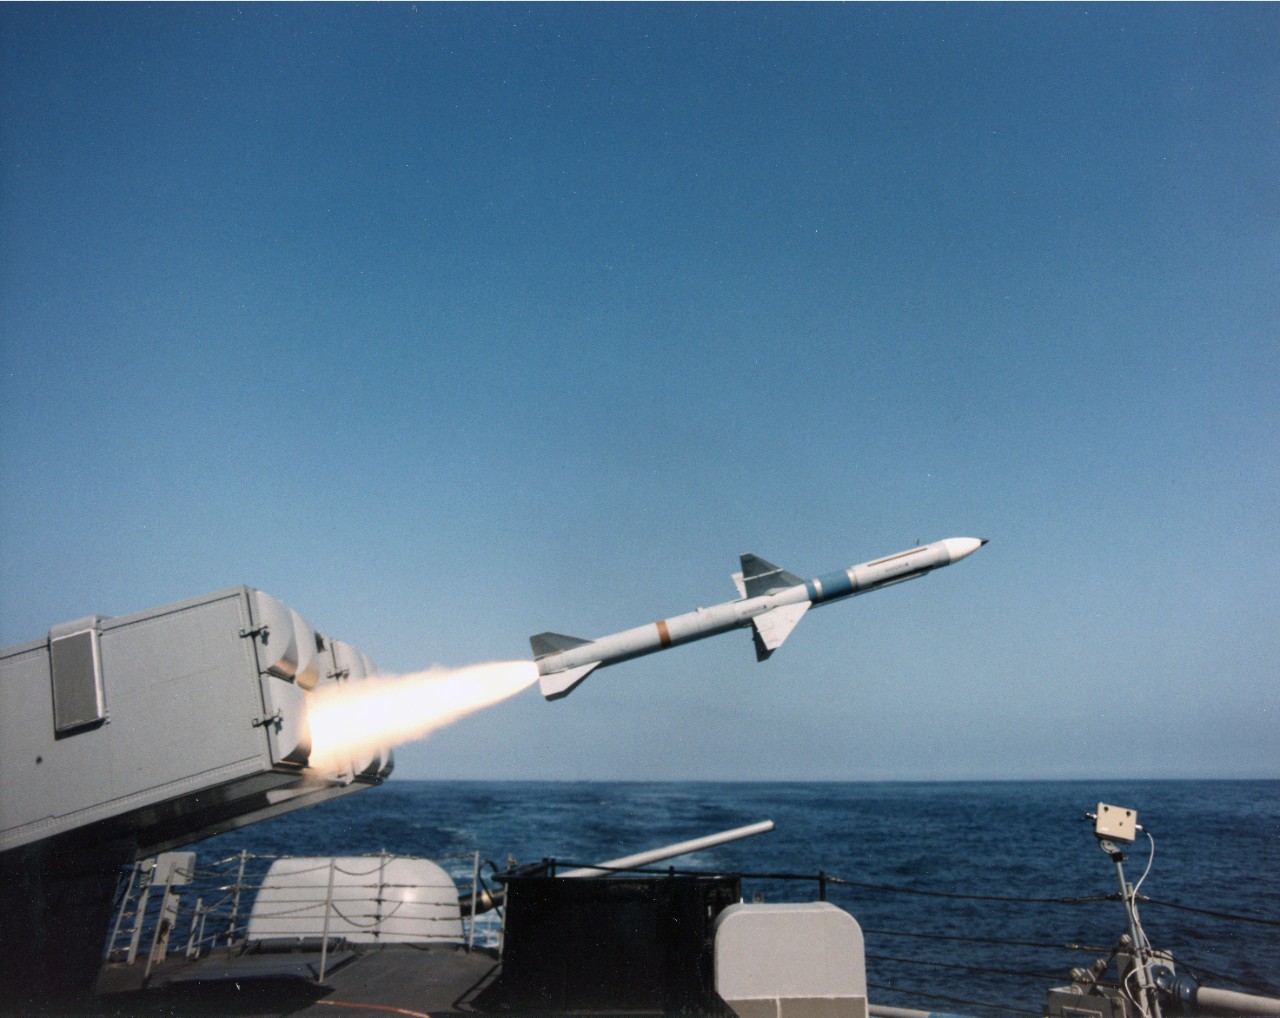 Launching of a Sea Sparrow missile. Unknown ship and date. 